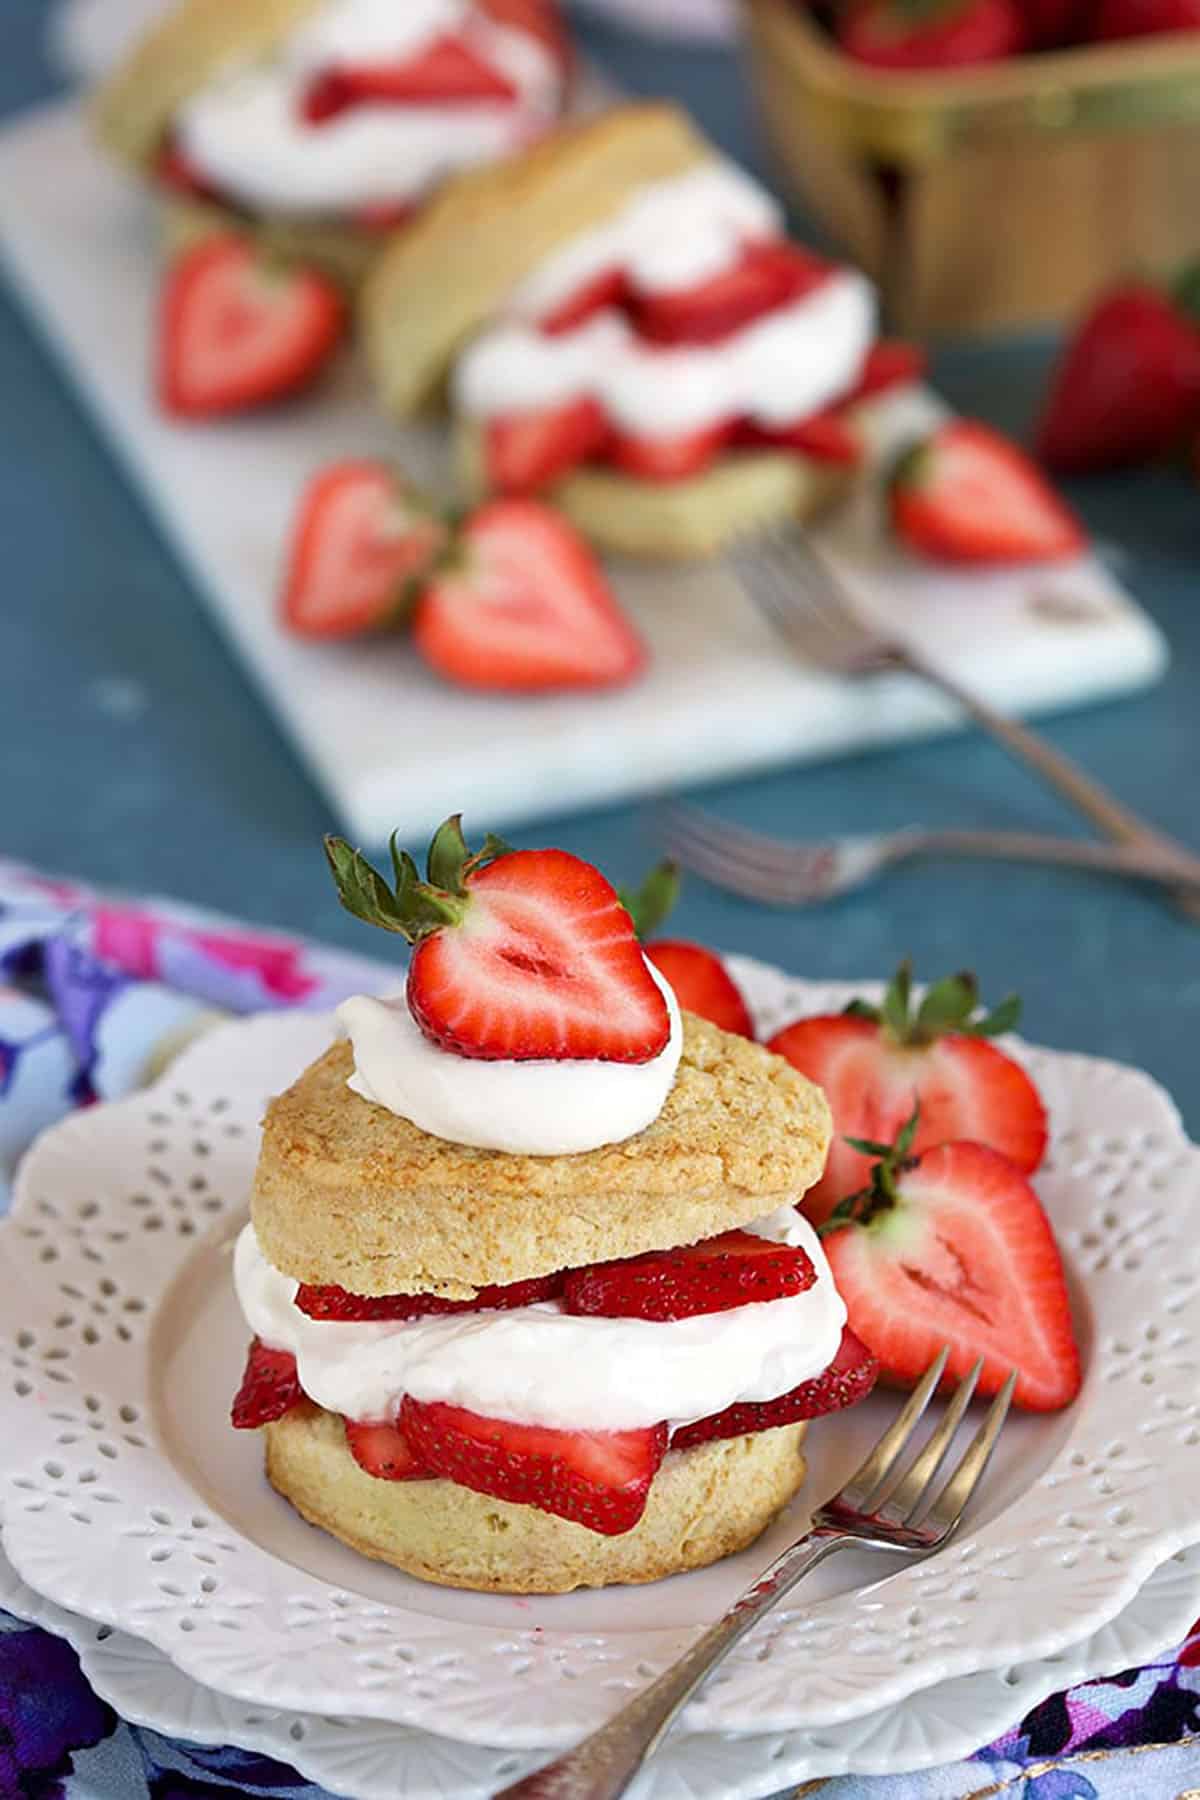 Homemade Strawberry Shortcake on a white plate with a pastry fork on a blue background